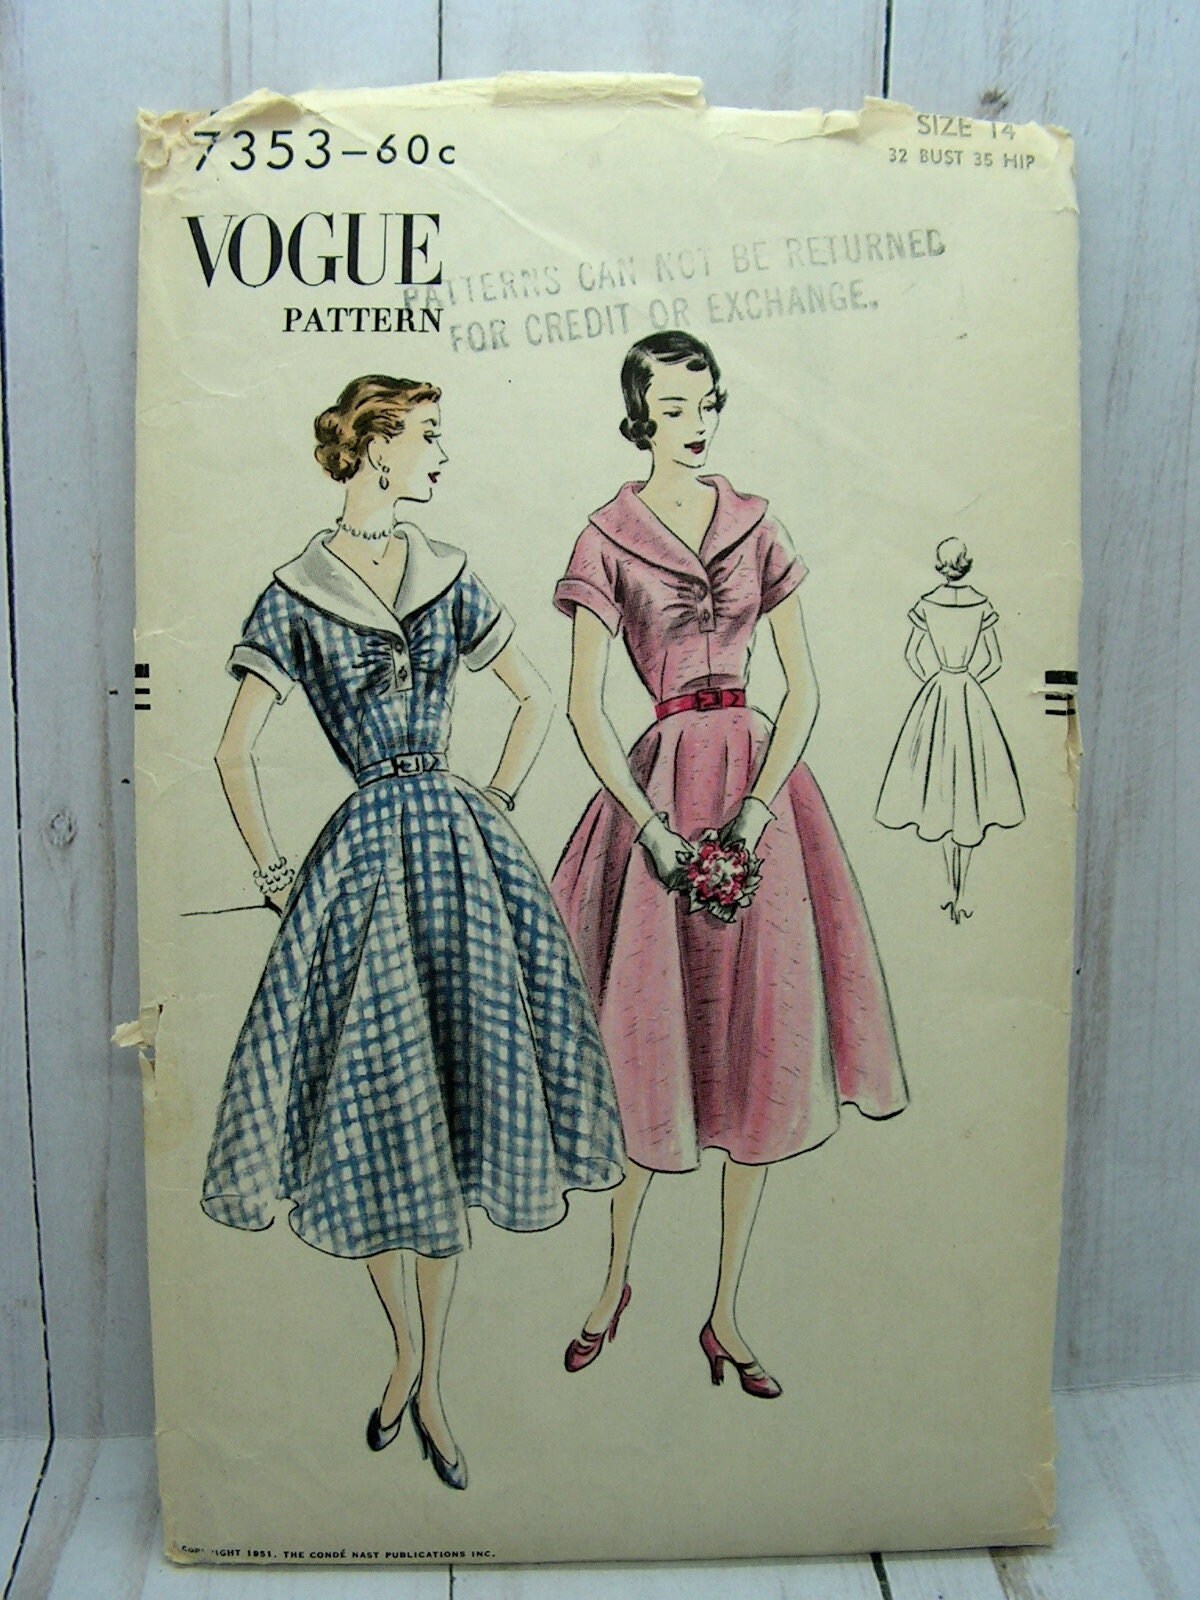 Vogue Pattern Book  March 1951 at Wolfgang's